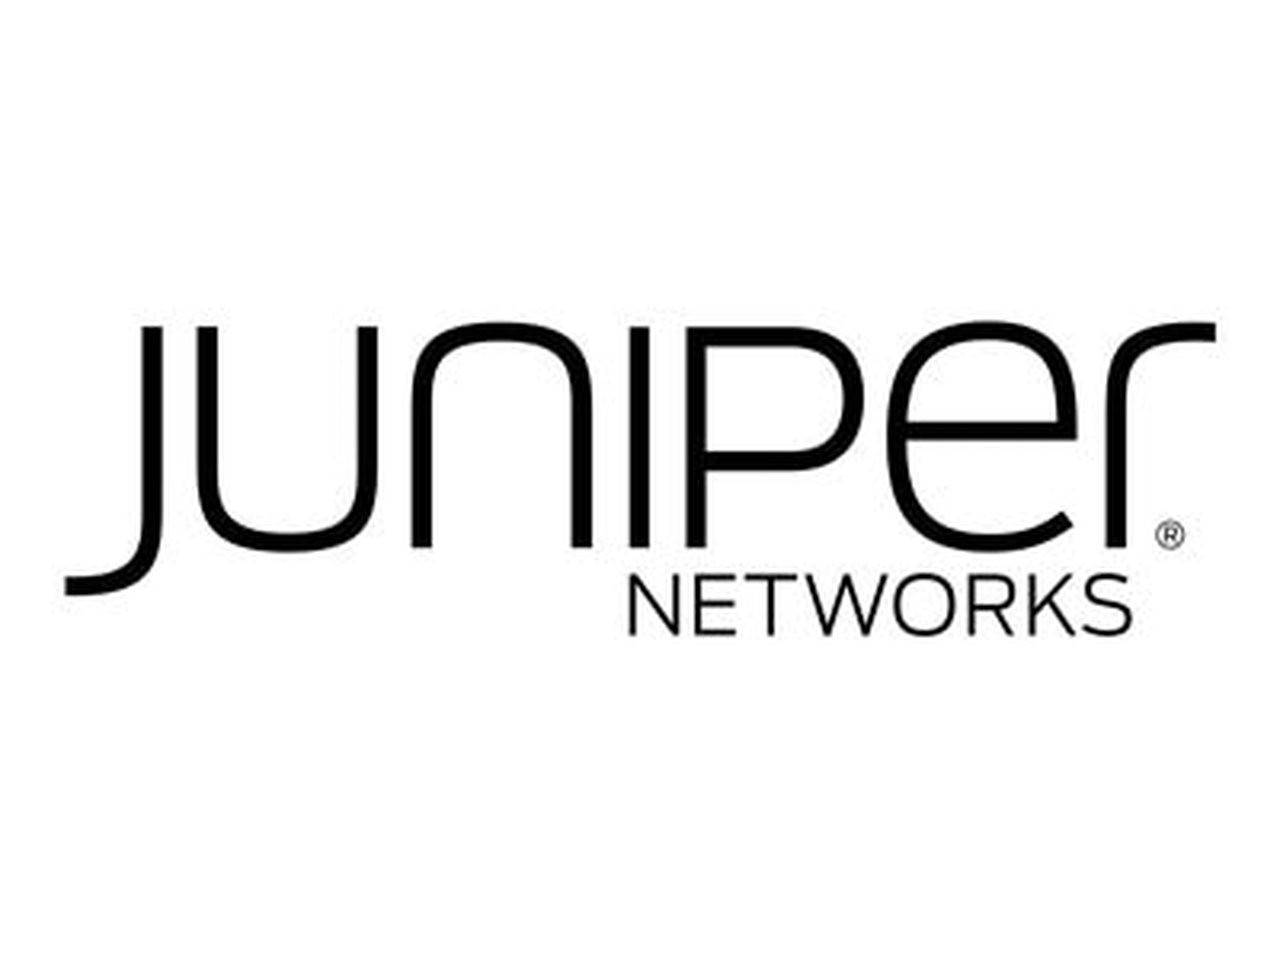 Juniper SRX320 Junos Software Enhanced with Firewall, NAT, IPSec, Routing, Switching, MPLS and Application Security Services (must order SRX320 to complete the system)